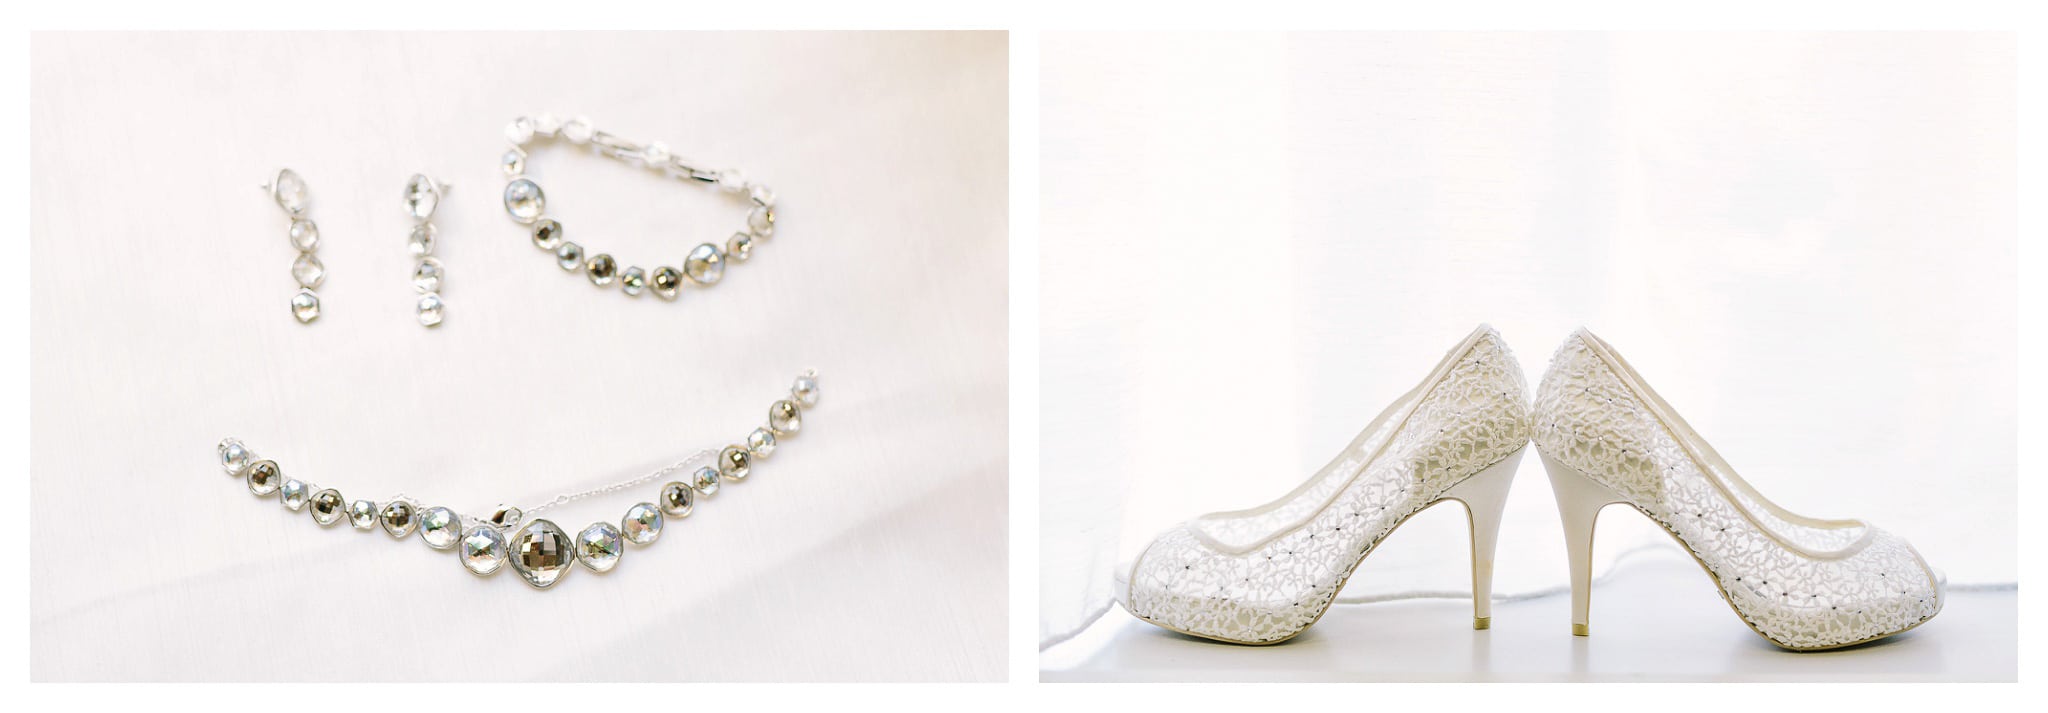 Her Wedding Jewelry and a Great pair of Wedding Heels both with gold embellishments - Venue - Beach House Gulf Stream Breeze, Beach Realty Catering and Cake - Buttercream Cakes and Catering, LLC Flowers - Callas Florist Event Rentals - Event Works DJ - Scott Shaw